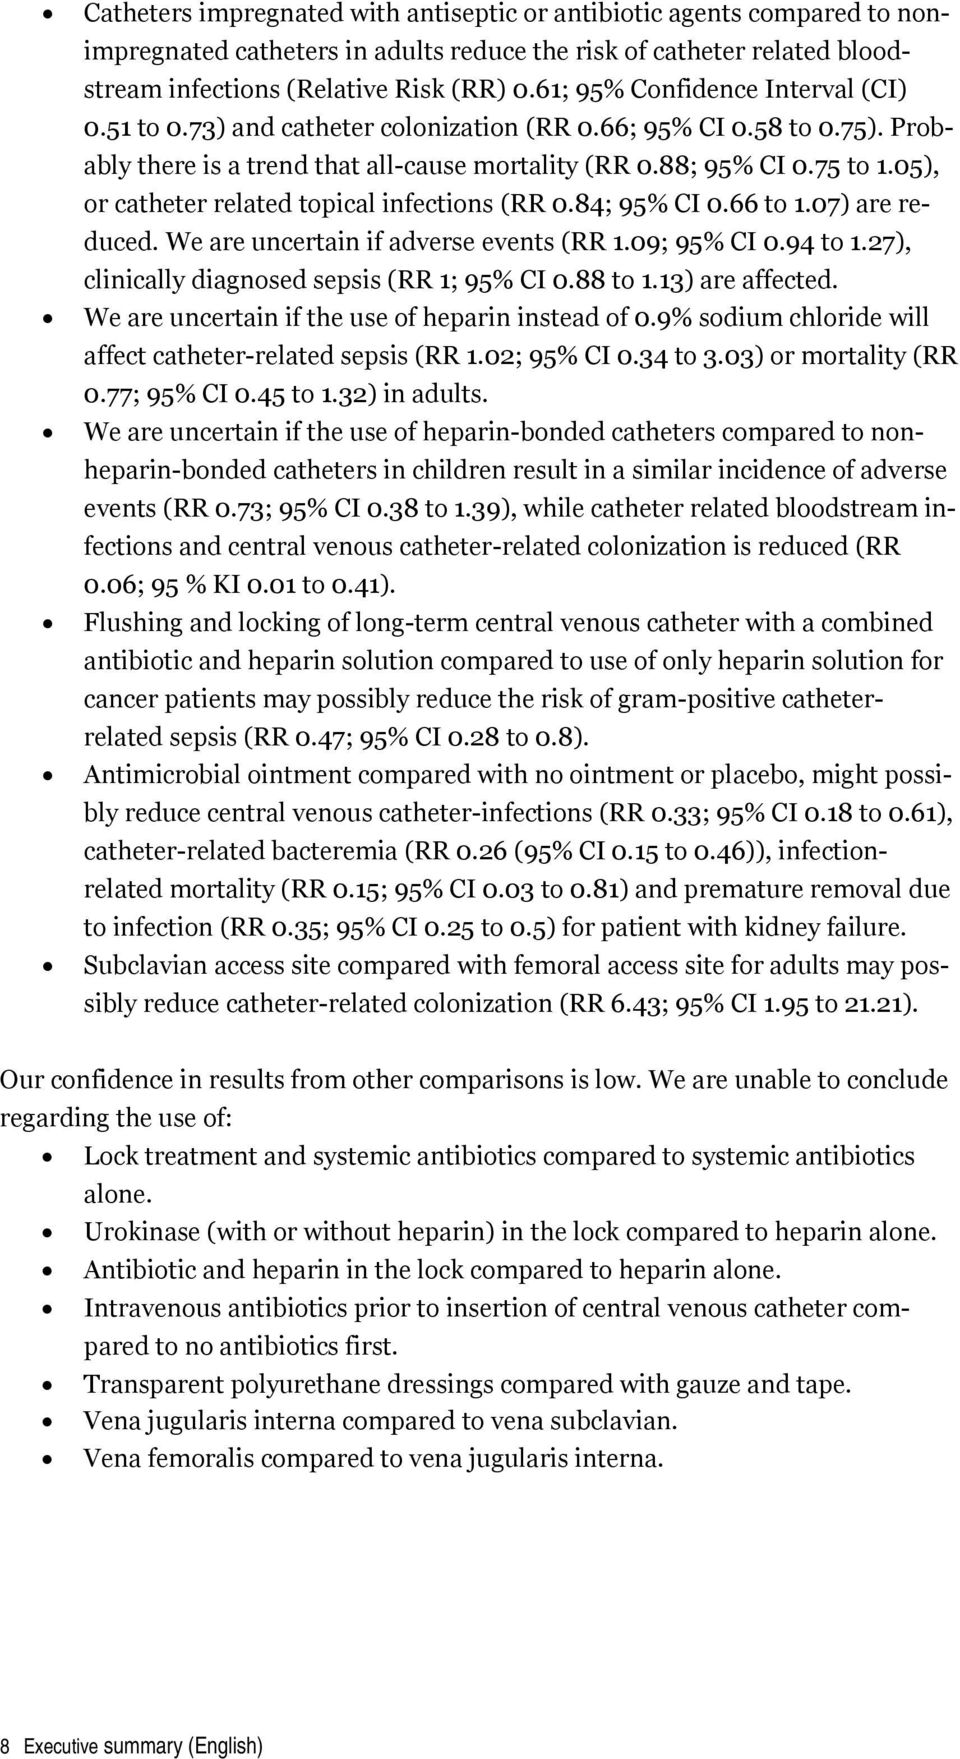 05), or catheter related topical infections (RR 0.84; 95% CI 0.66 to 1.07) are reduced. We are uncertain if adverse events (RR 1.09; 95% CI 0.94 to 1.27), clinically diagnosed sepsis (RR 1; 95% CI 0.